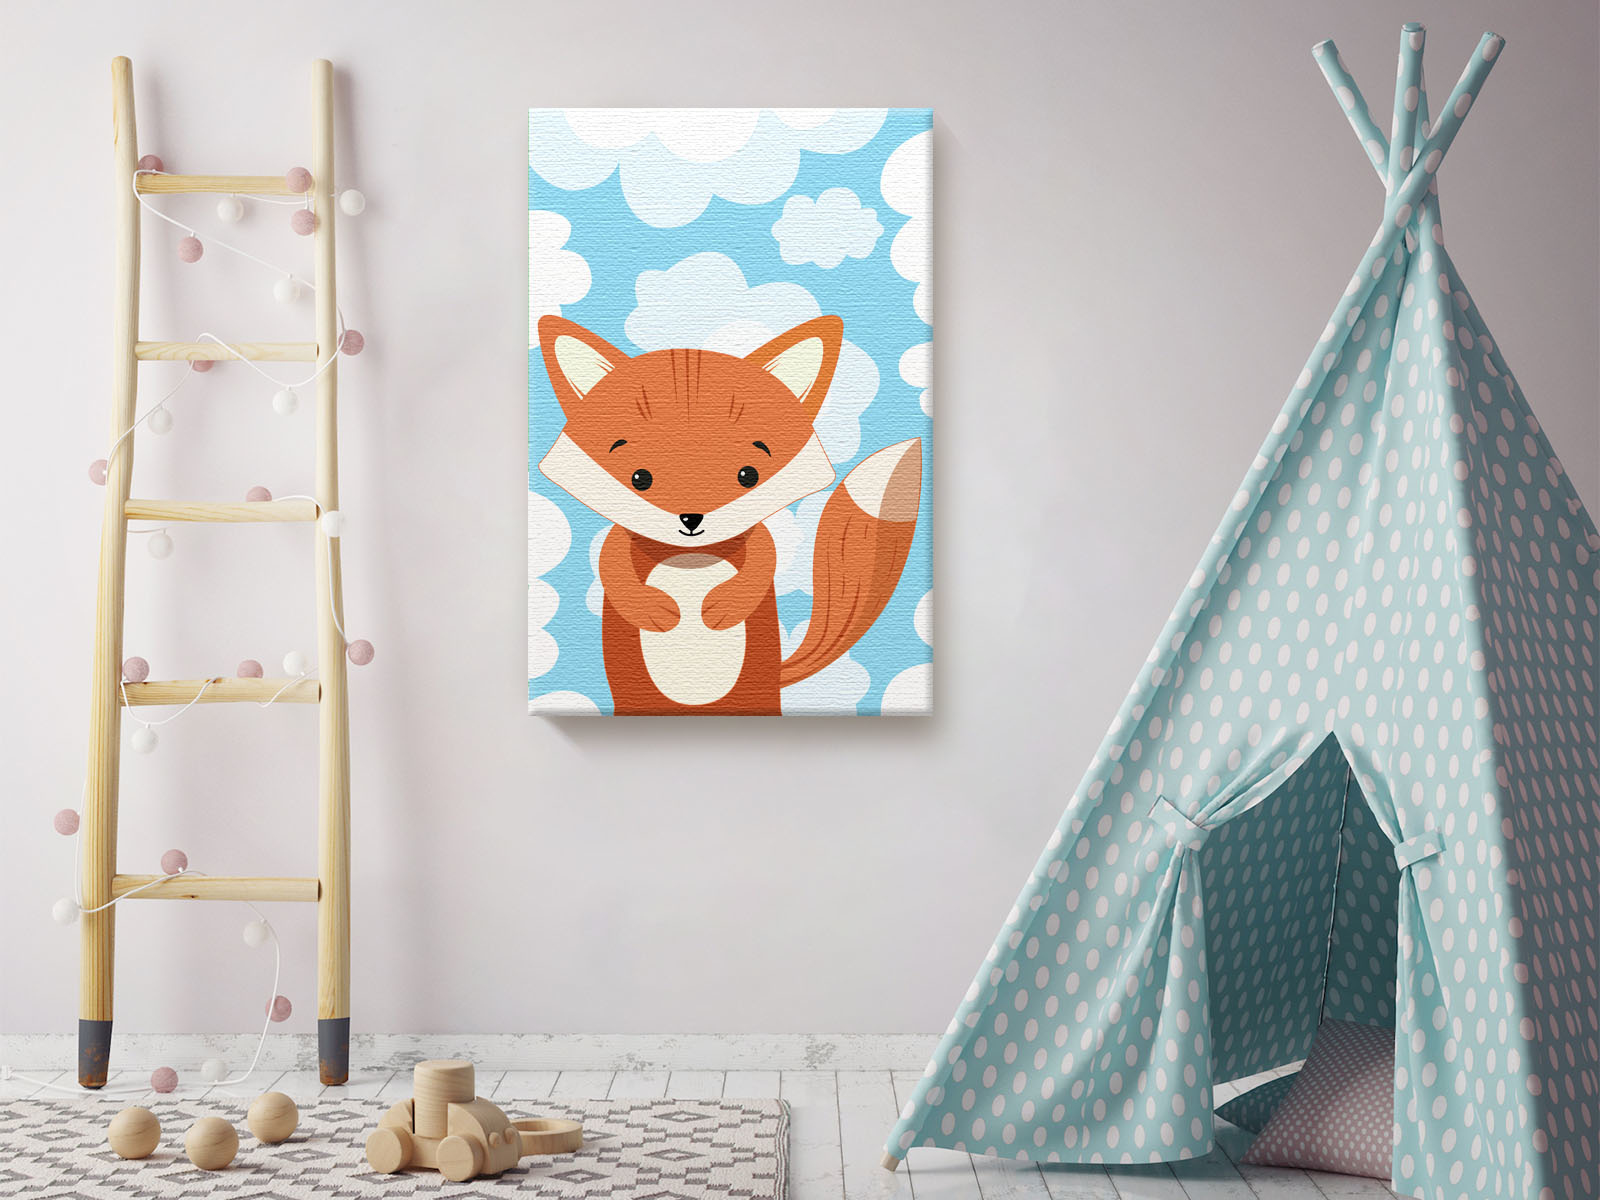 Awkward Styles Fox in Clouds Canvas Art Little Fox Canvas Decor Baby Girl Room Decoration Baby Boy Play Room Wall Art Ready to Hang Artwork for Kids Fox Canvas Illustration Fox Nursery Baby Room - image 3 of 7